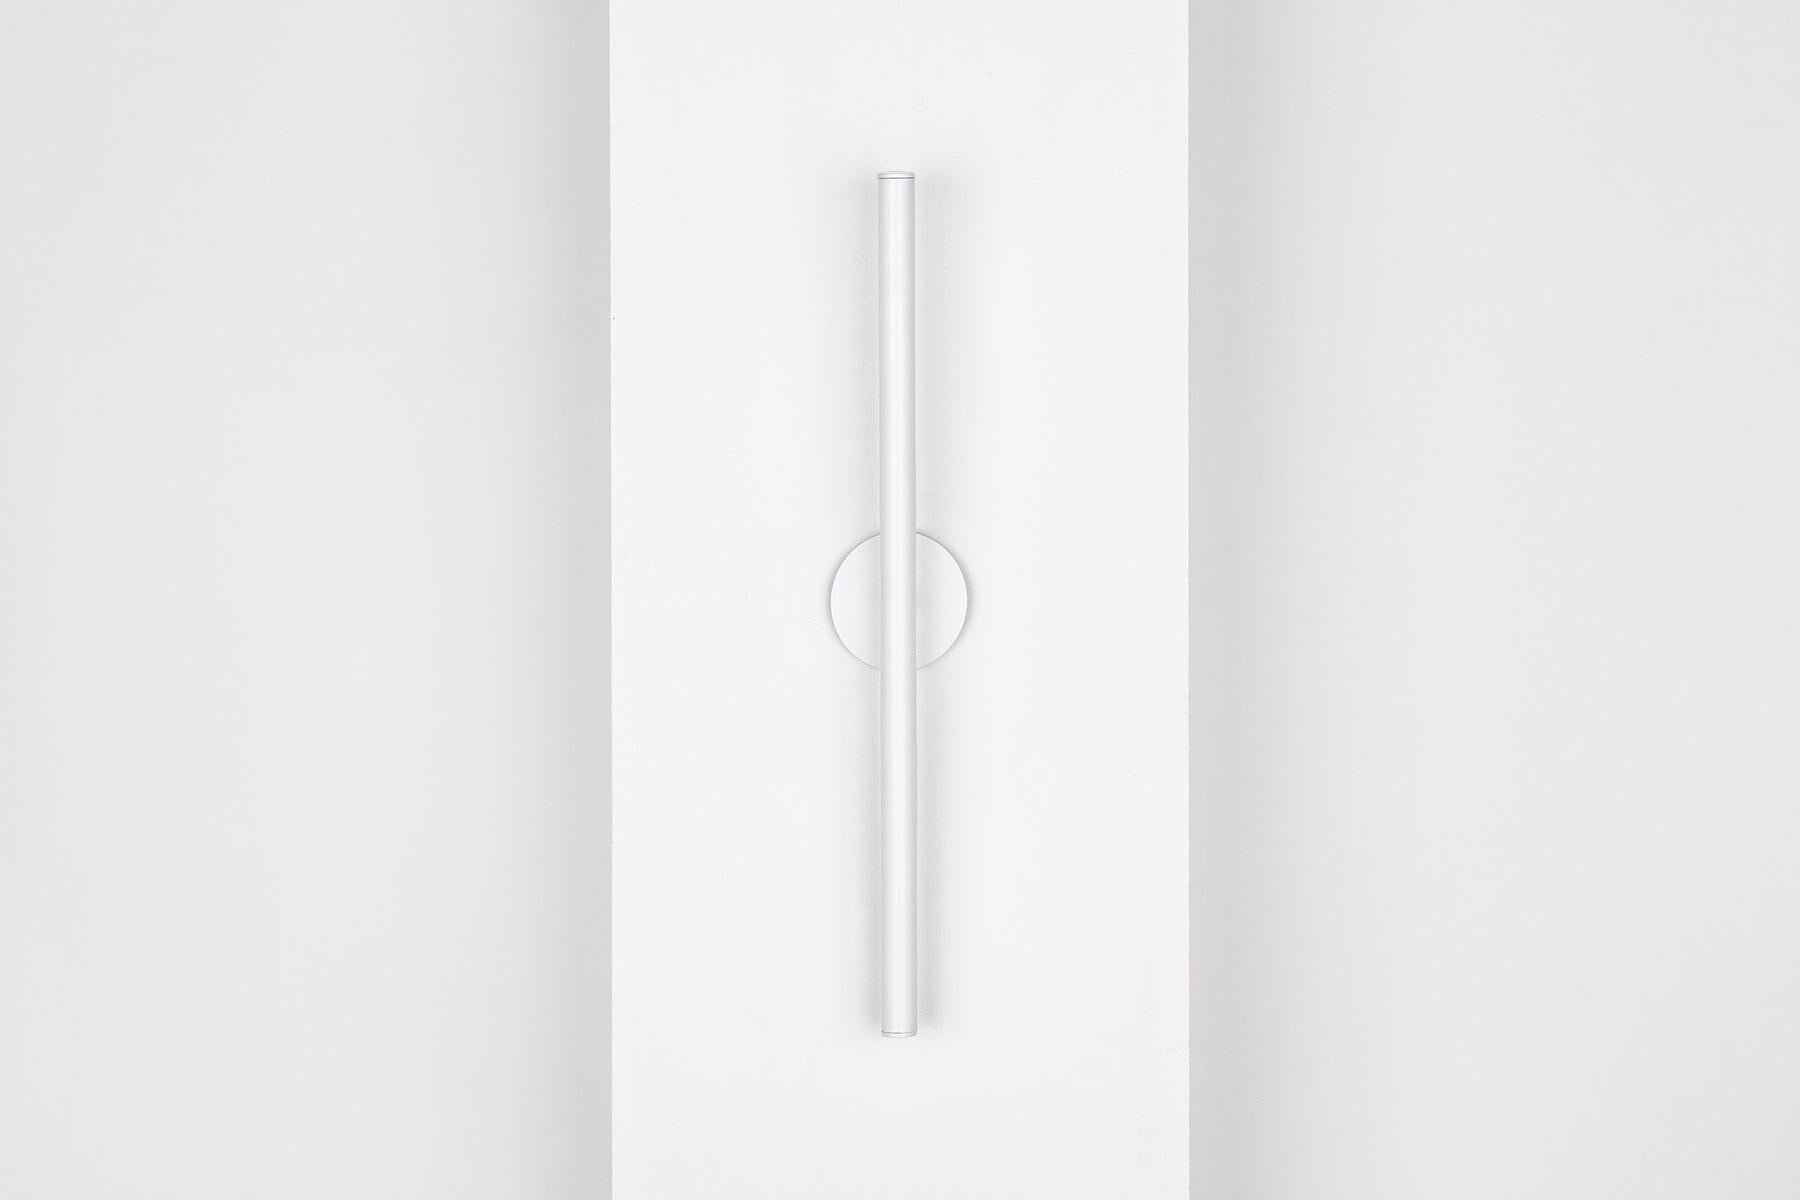 The Formation double sconce is an elegant wall-mounted LED lighting fixture ideally suited for, hallways, powder rooms, and other commercial spaces that require accent lighting. 

The core design is a set of interlocking extruded aluminum profiles.